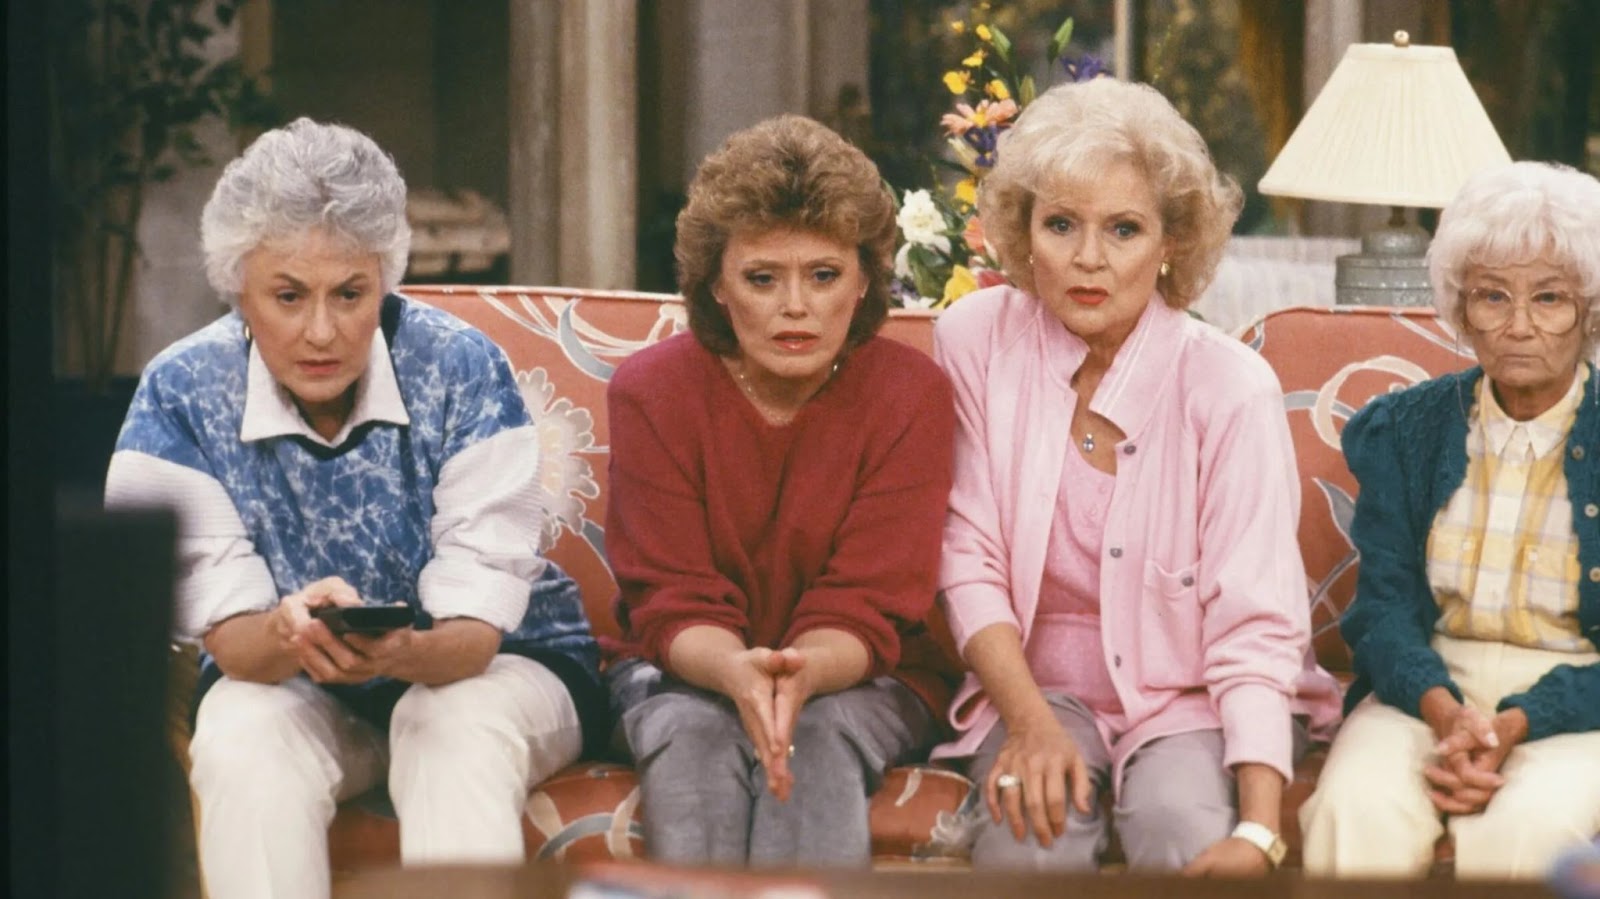 The four characters of The Golden Girls are staring very seriously at a television set during one of the scenes in The Golden Girls.